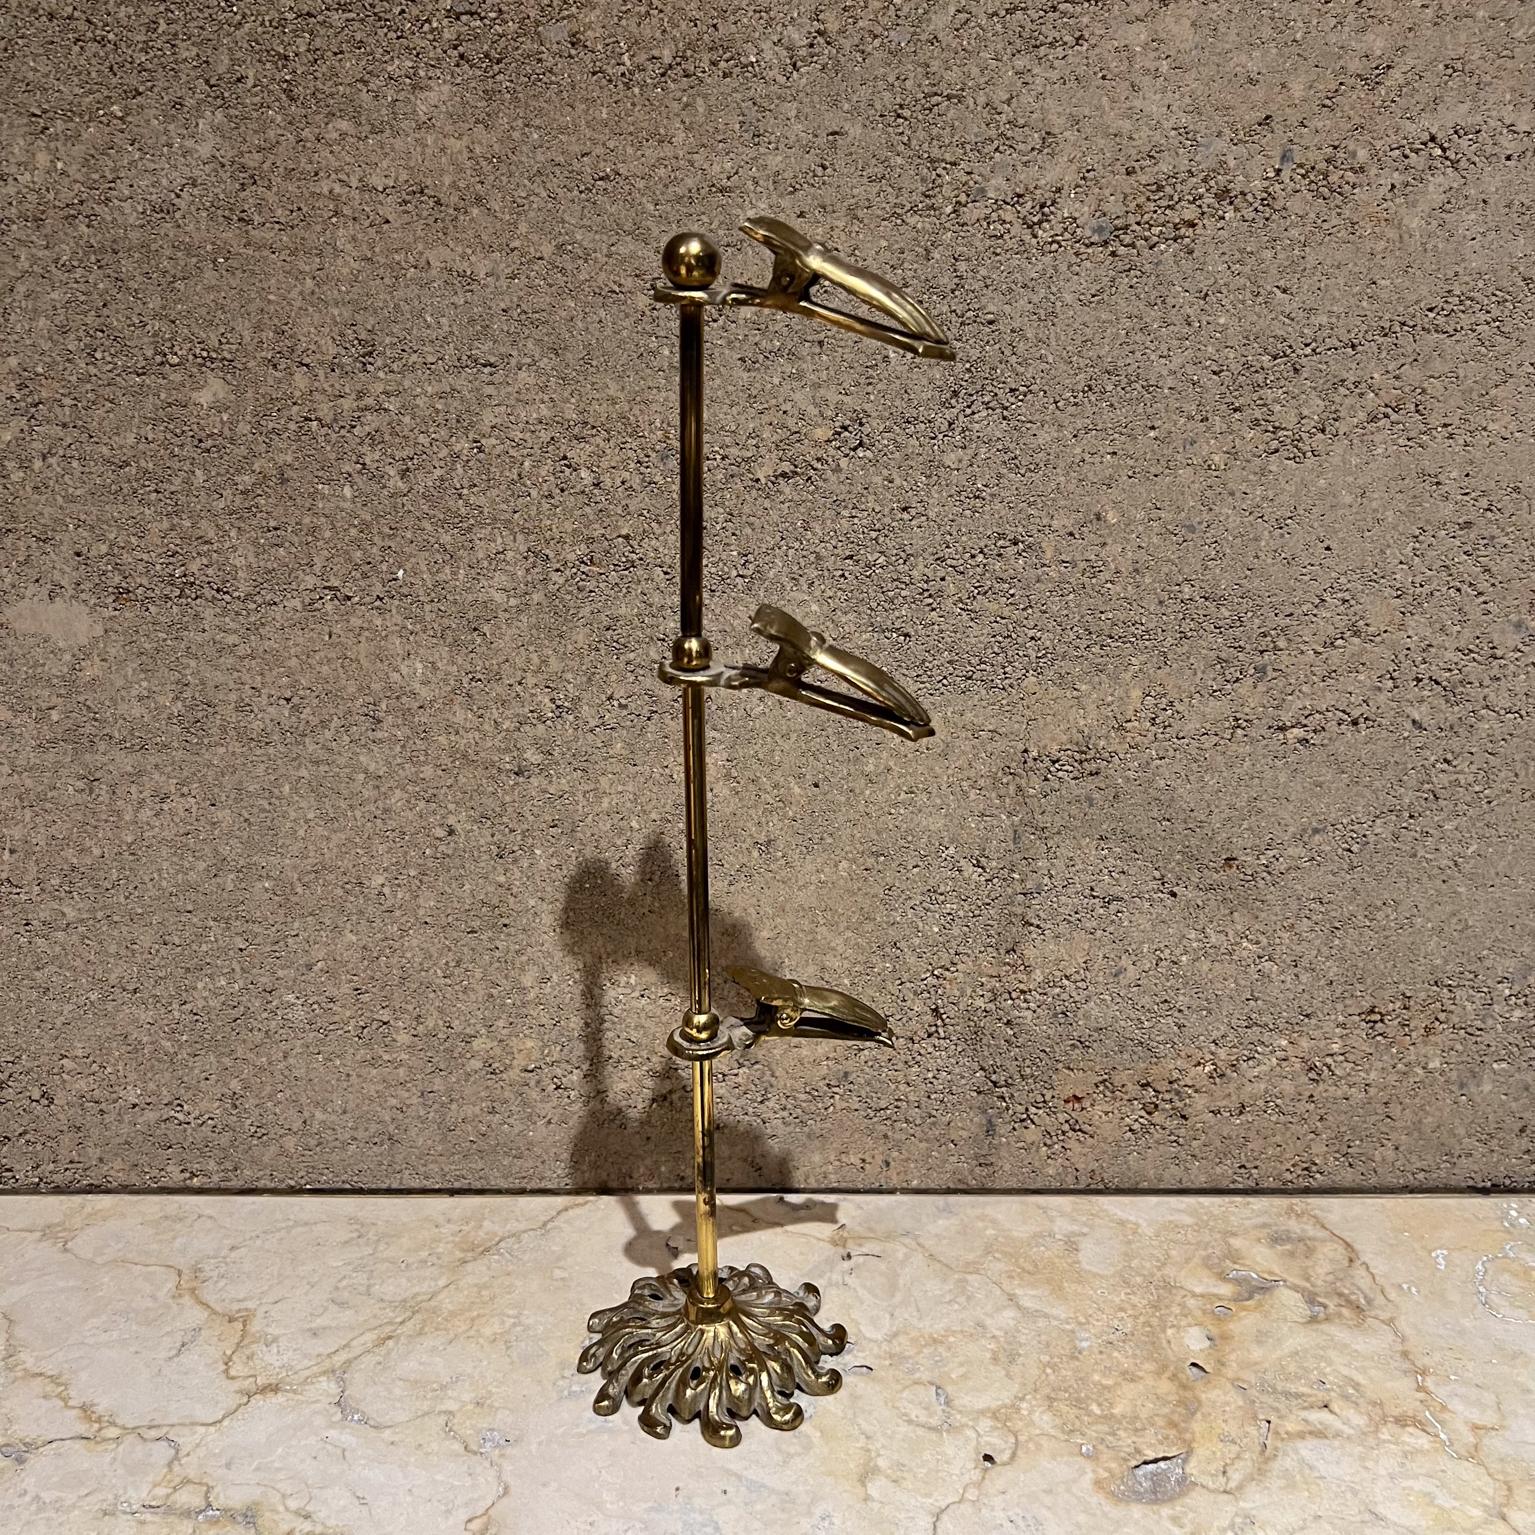 1940s Brass Hands Calling Card Letter Note Picture Holder Stand
Hands have spring clips.
14.25 h x 4 diameter
Preowned vintage condition.
Refer to images.